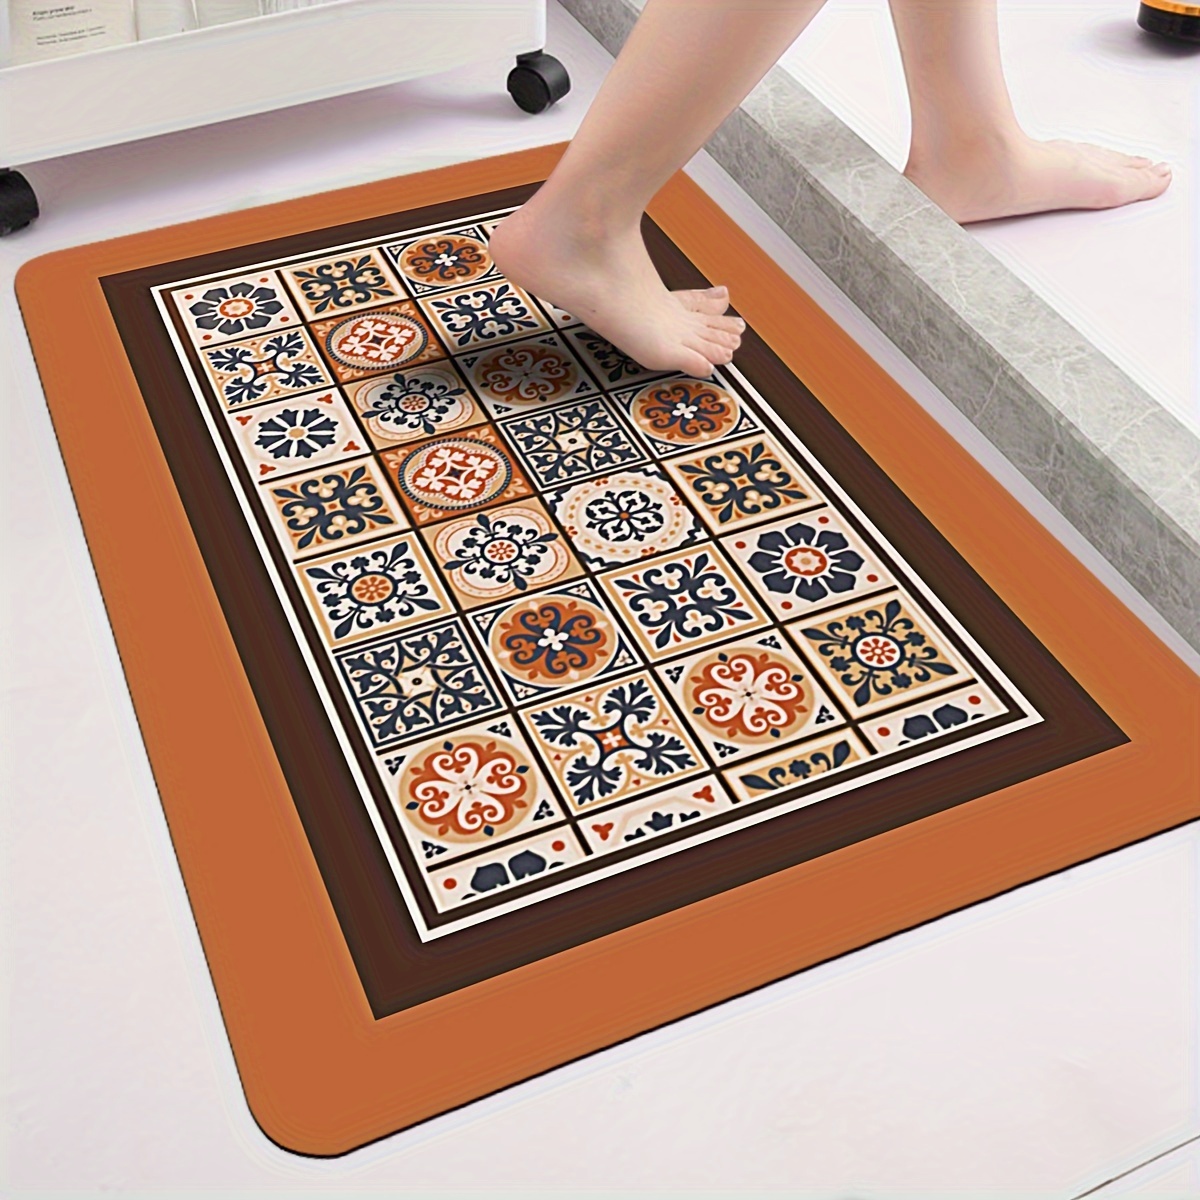 Small Fresh Expansion Flower Diatom Mud Floor Mat Bathroom Bathroom Non-slip  Mat Absorbs Water Easy To Dry And Easy To Clean Floor Mat 